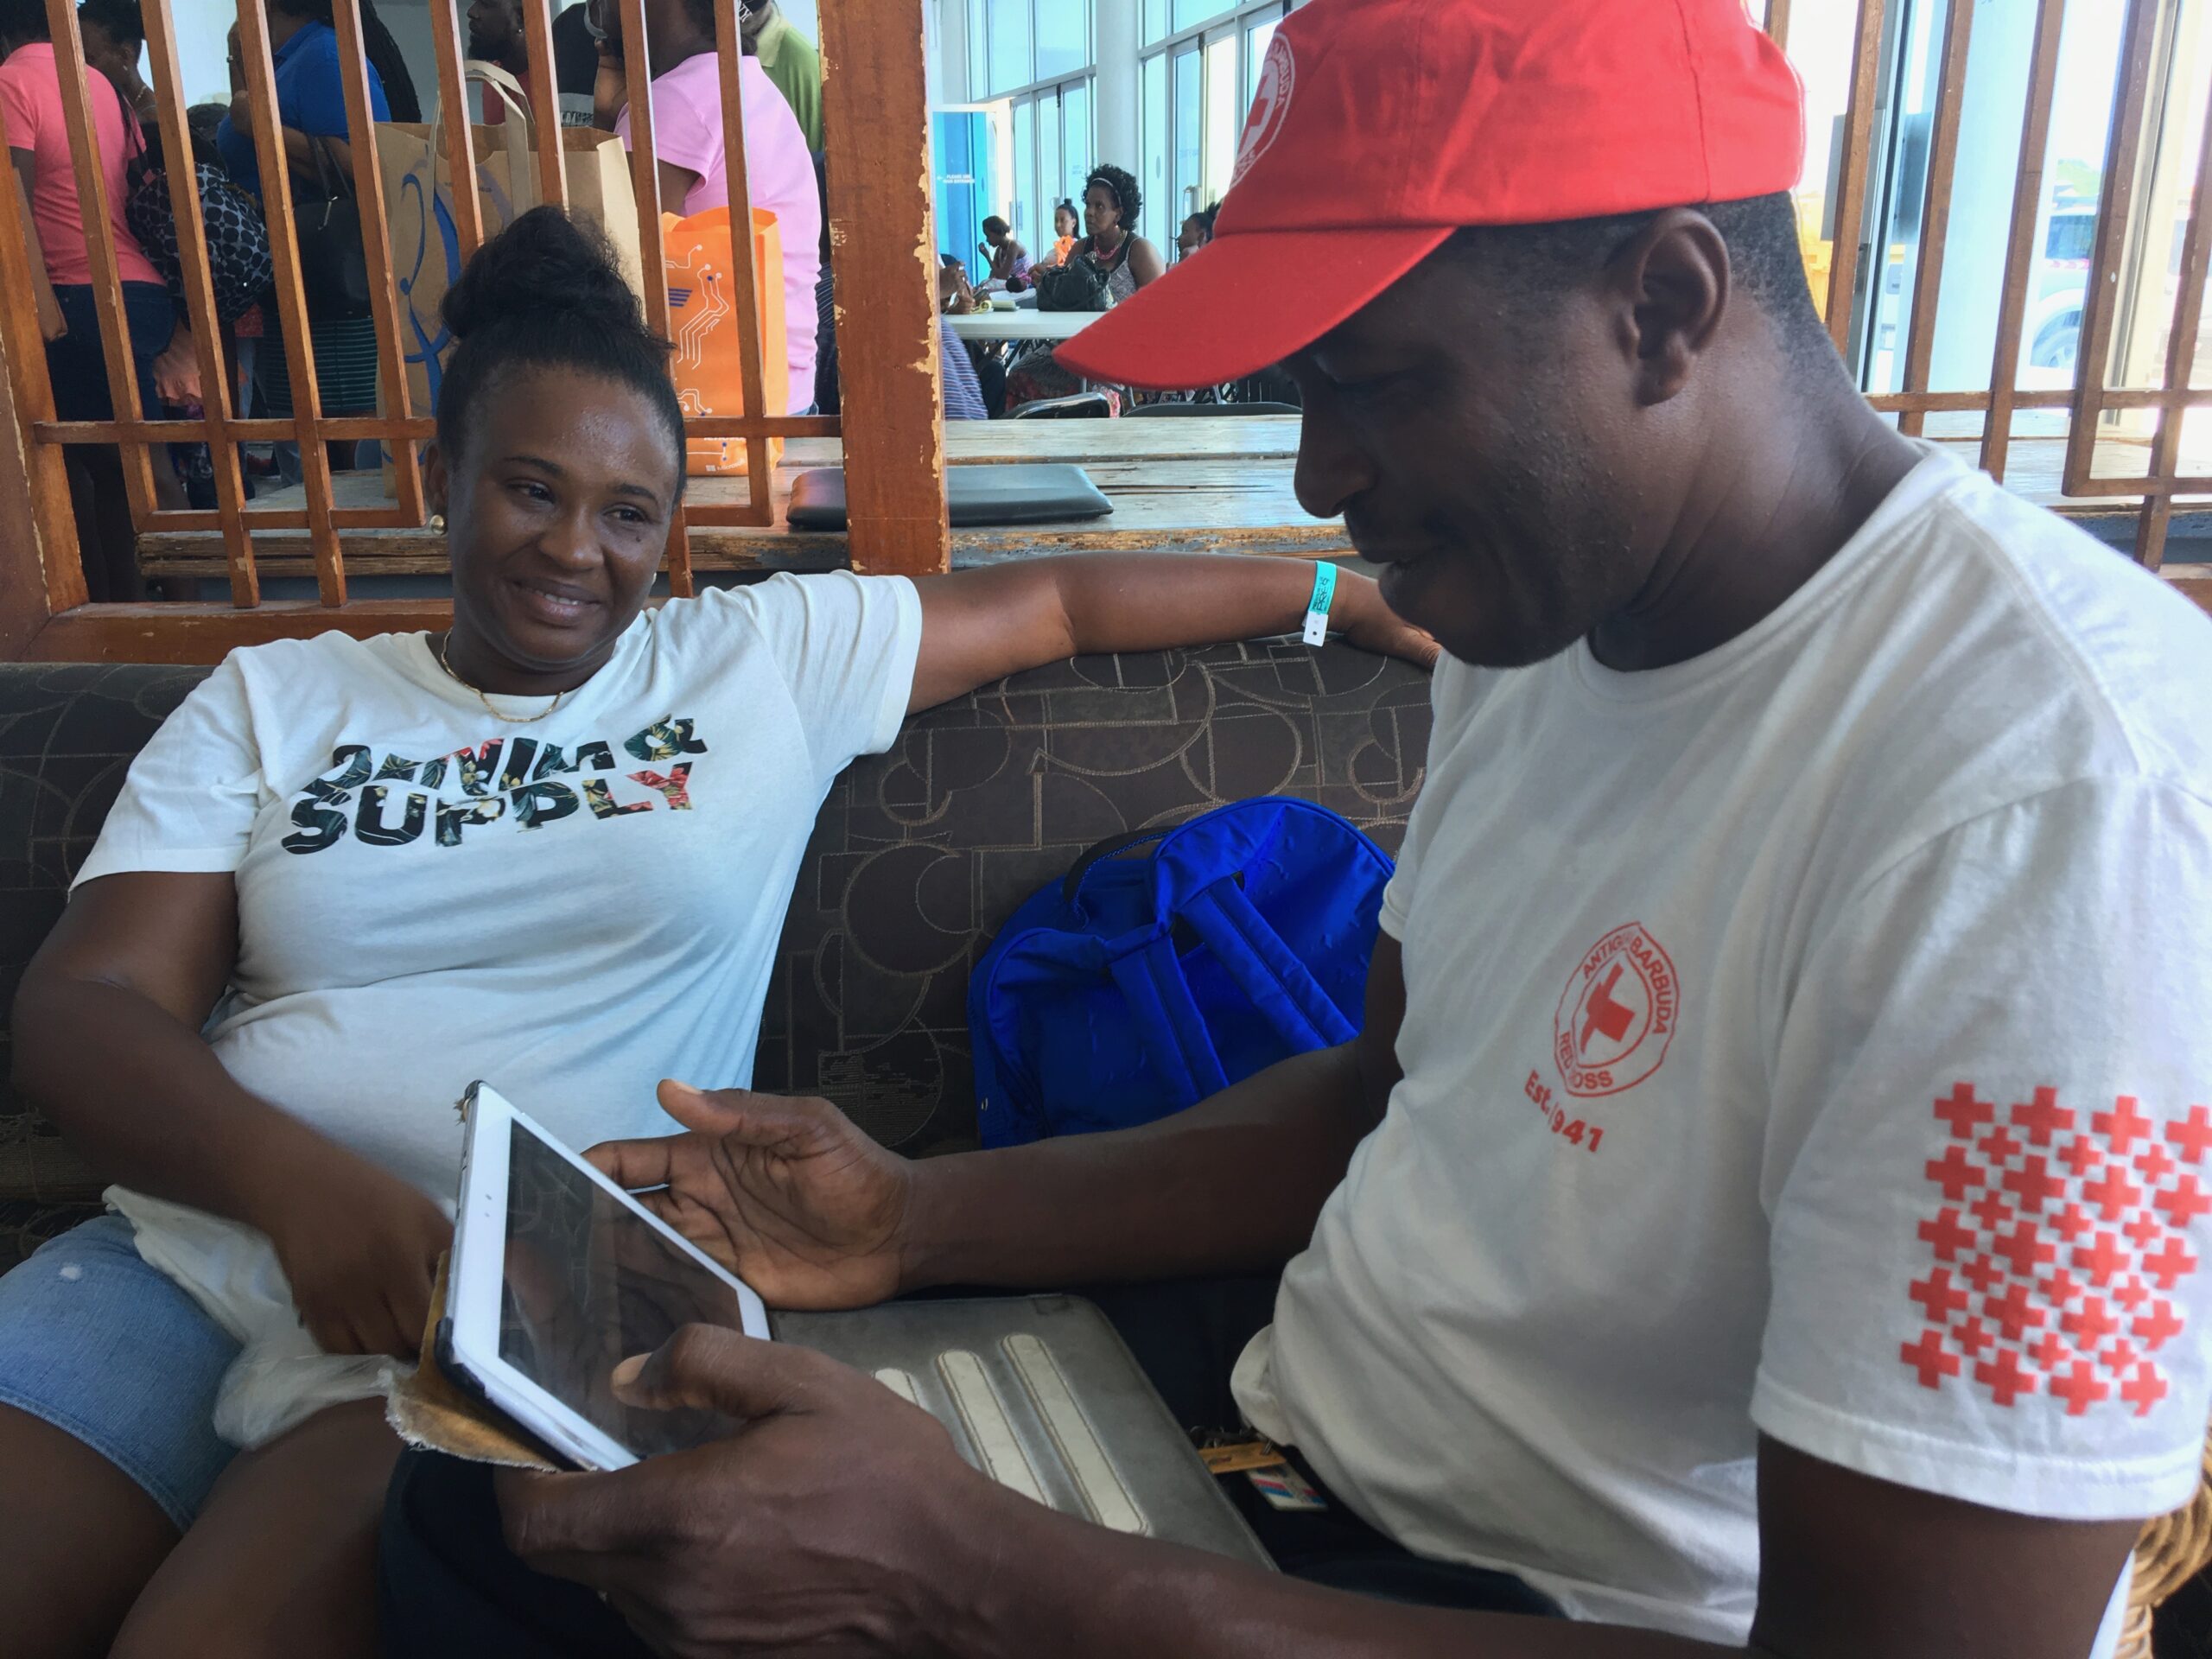 The image shows two smiling people reviewing documents on a tablet in an informal setting. One person wears a t-shirt with a graphic design, while the other has a red cap and a white shirt with a red cross logo.